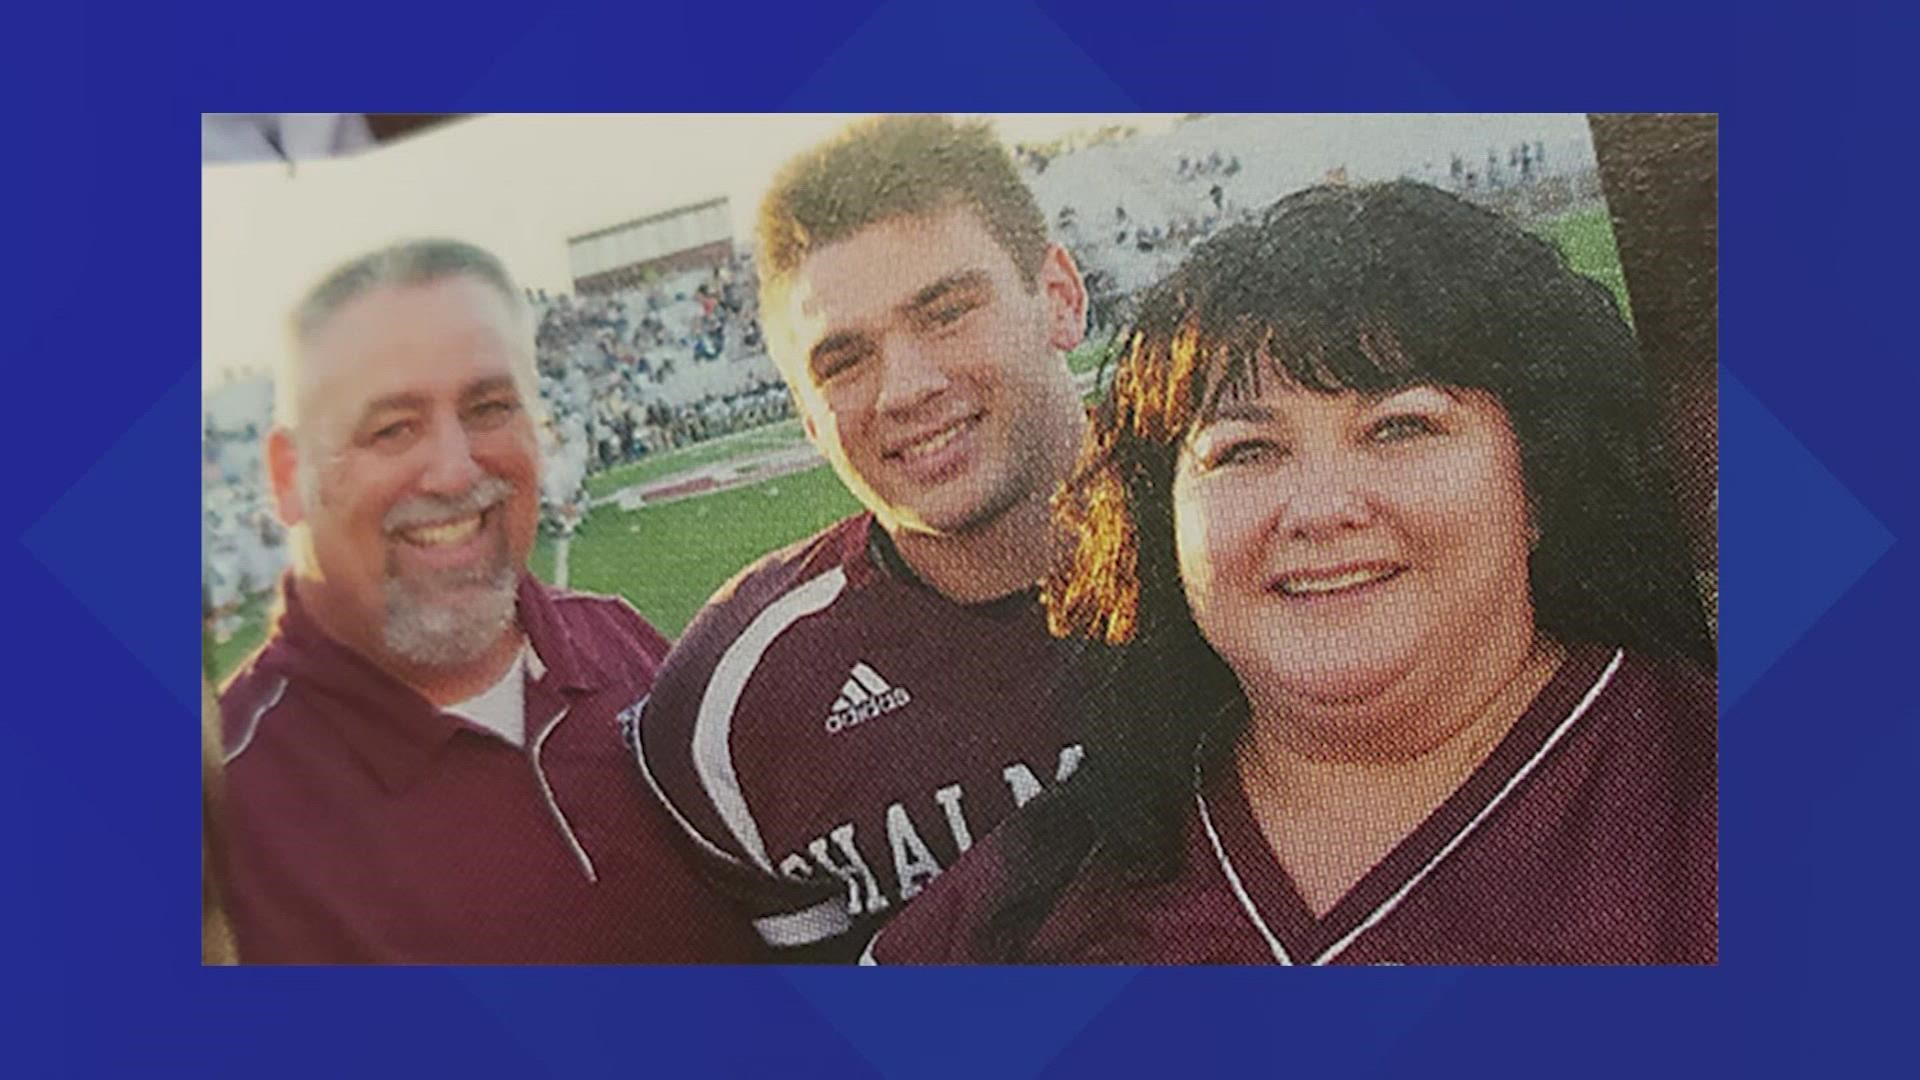 A 25-year-old former high school football star and NASA employee died Tuesday in the Arabi, Louisiana tornado, along with his pet dog.